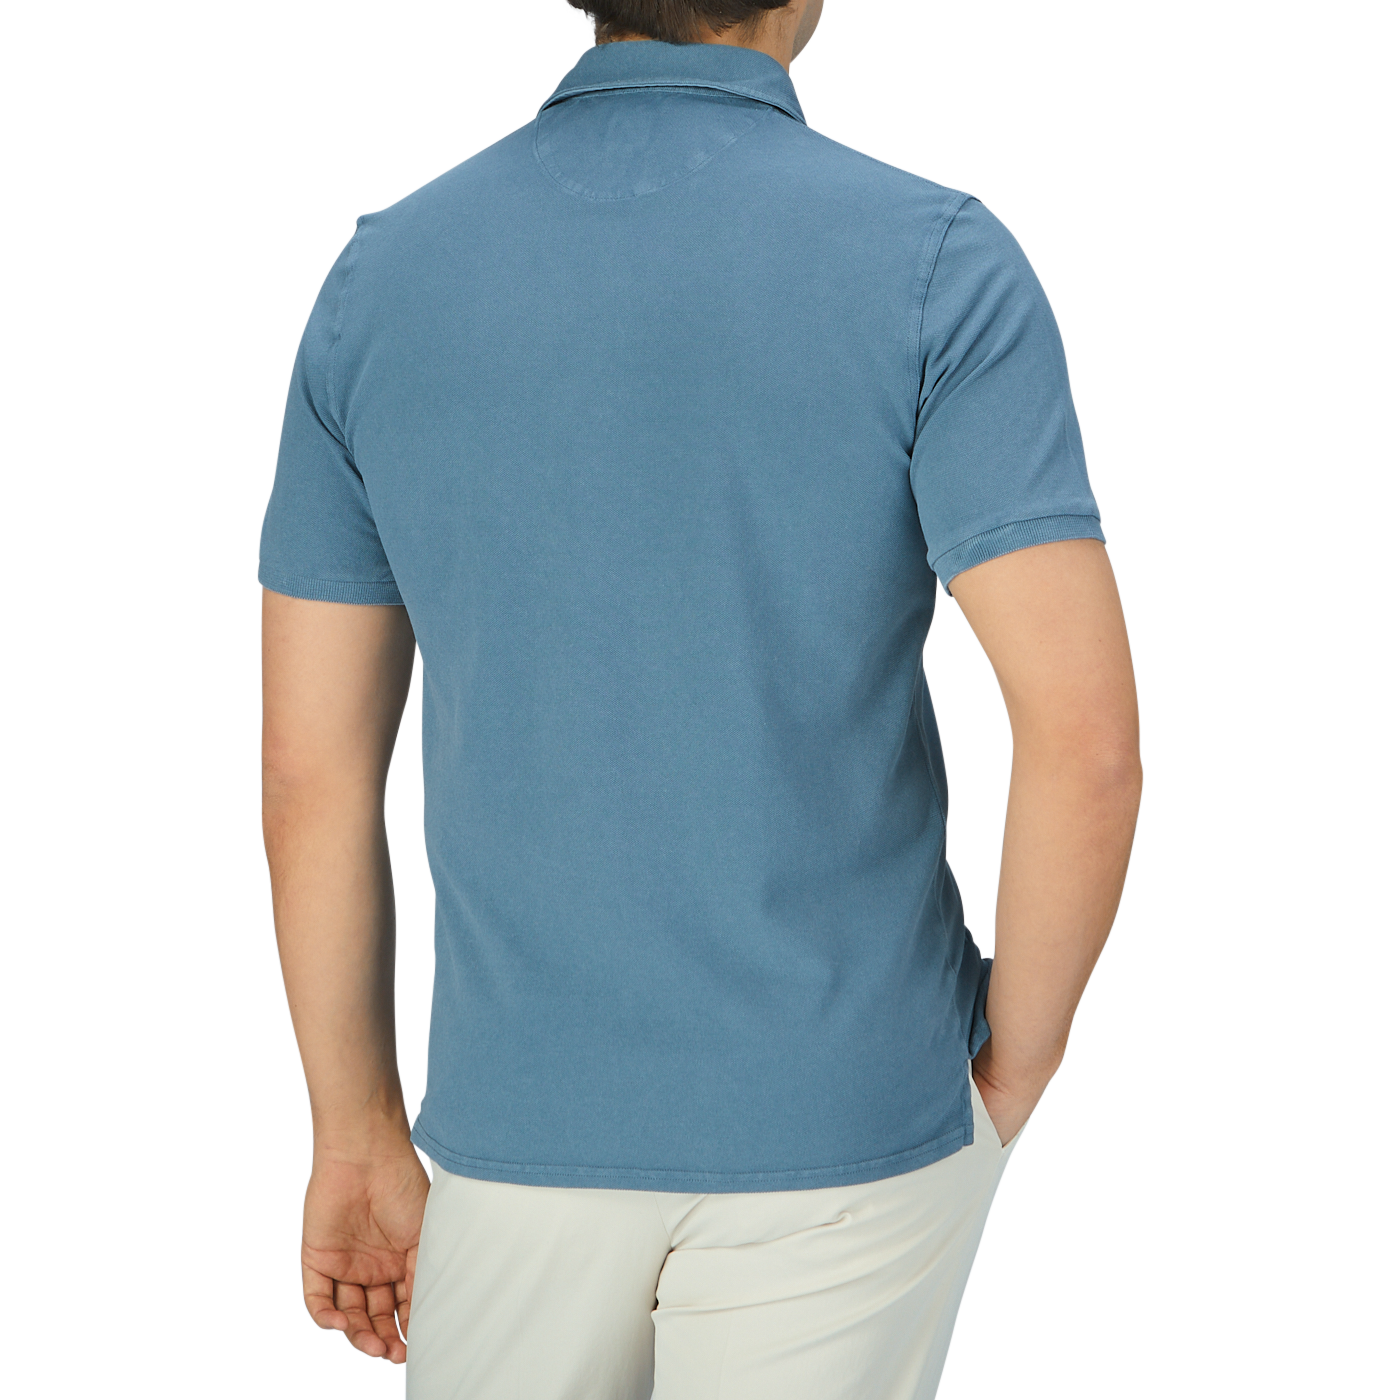 The back view of a man wearing a Fedeli Washed Turquoise Cotton Pique Polo Shirt.